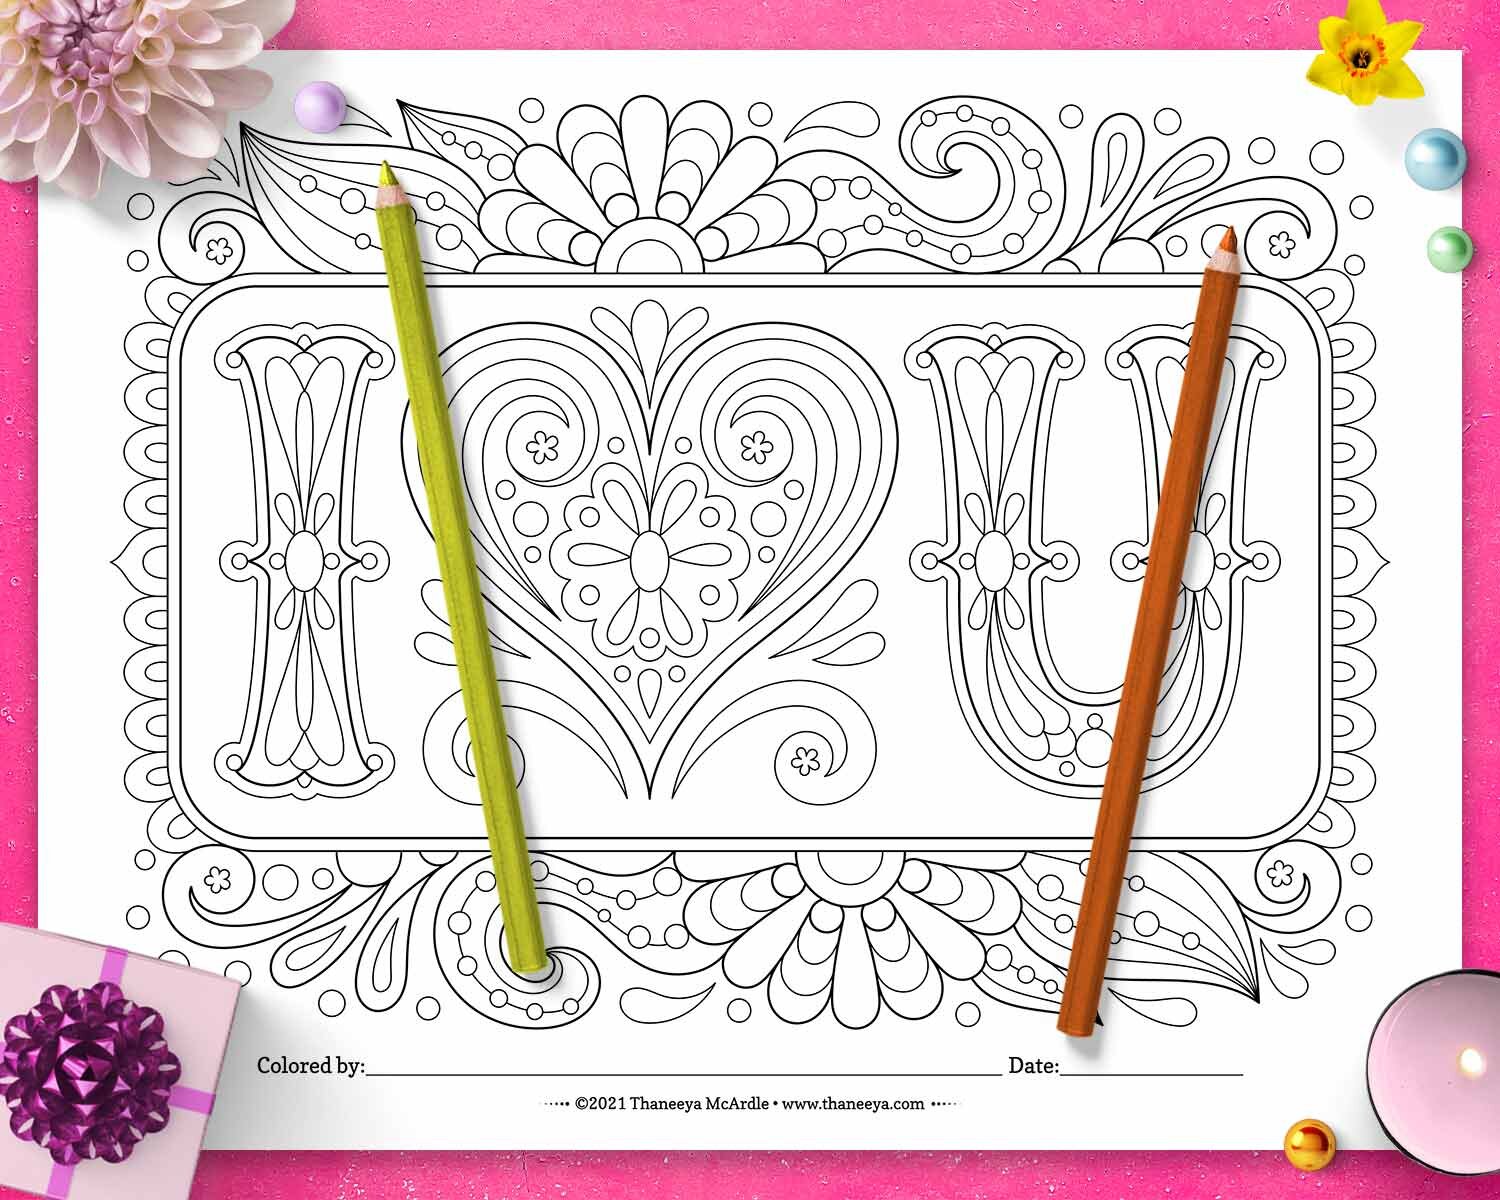 https://images.squarespace-cdn.com/content/v1/5511fc7ce4b0a3782aa9418b/1612315998065-J6AGQ0Y320ARD205ANCQ/I-Love-You-Coloring-Page-by-Thaneeya-McArdle.jpg